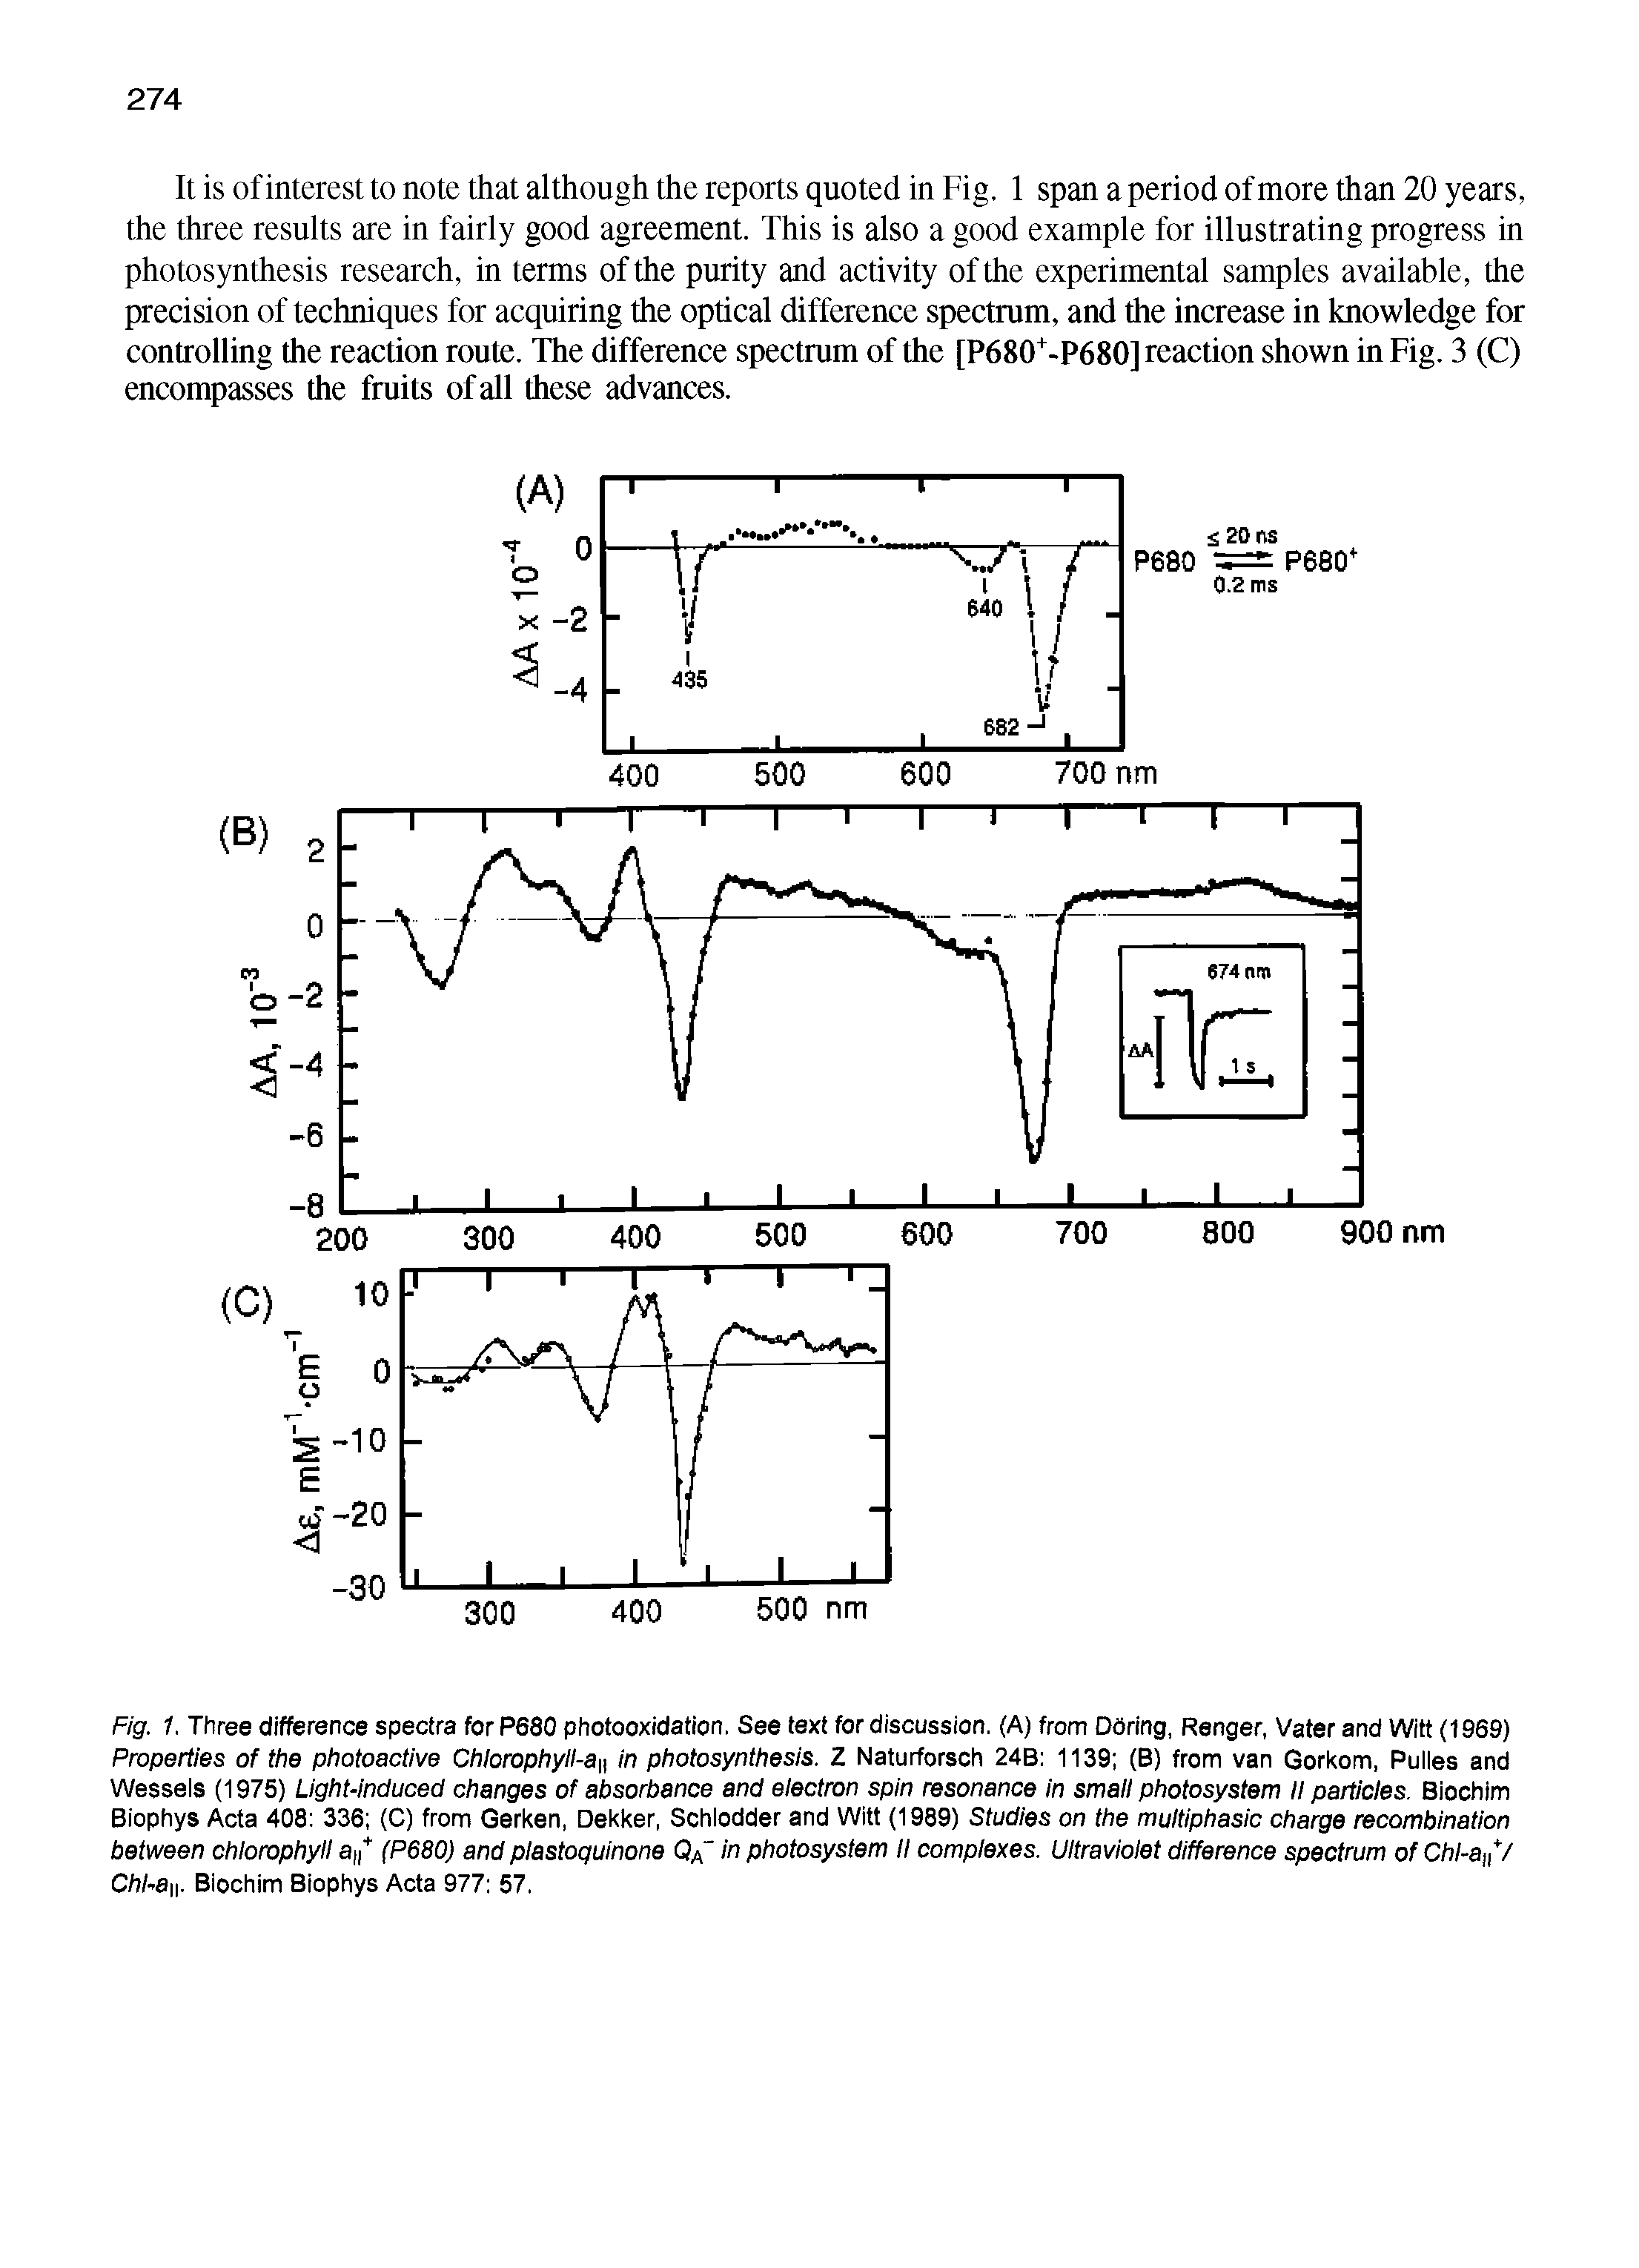 Fig. 1. Three difference spectra for P680 photooxidation. See text for discussion. (A) from DOring, Renger, Vater and Witt (1969) Properties of the photoactive Chlorophyll-a f in photosynthesis. Z Naturforsch 24B 1139 (B) from van Gorkom, Pulles and Wessels (1975) Light-induced changes of absorbance and electron spin resonance in small photosystem II particles. Biochim Biophys Acta 408 336 (C) from Gerken, Dekker, Schlodder and Witt (1989) Studies on the multiphasic charge recombination between chlorophyll a/ (P680) and plastoquinone in photosystem II complexes. Ultraviolet difference spectrum of Chl-a / Chl-a. Biochim Biophys Acta 977 57.